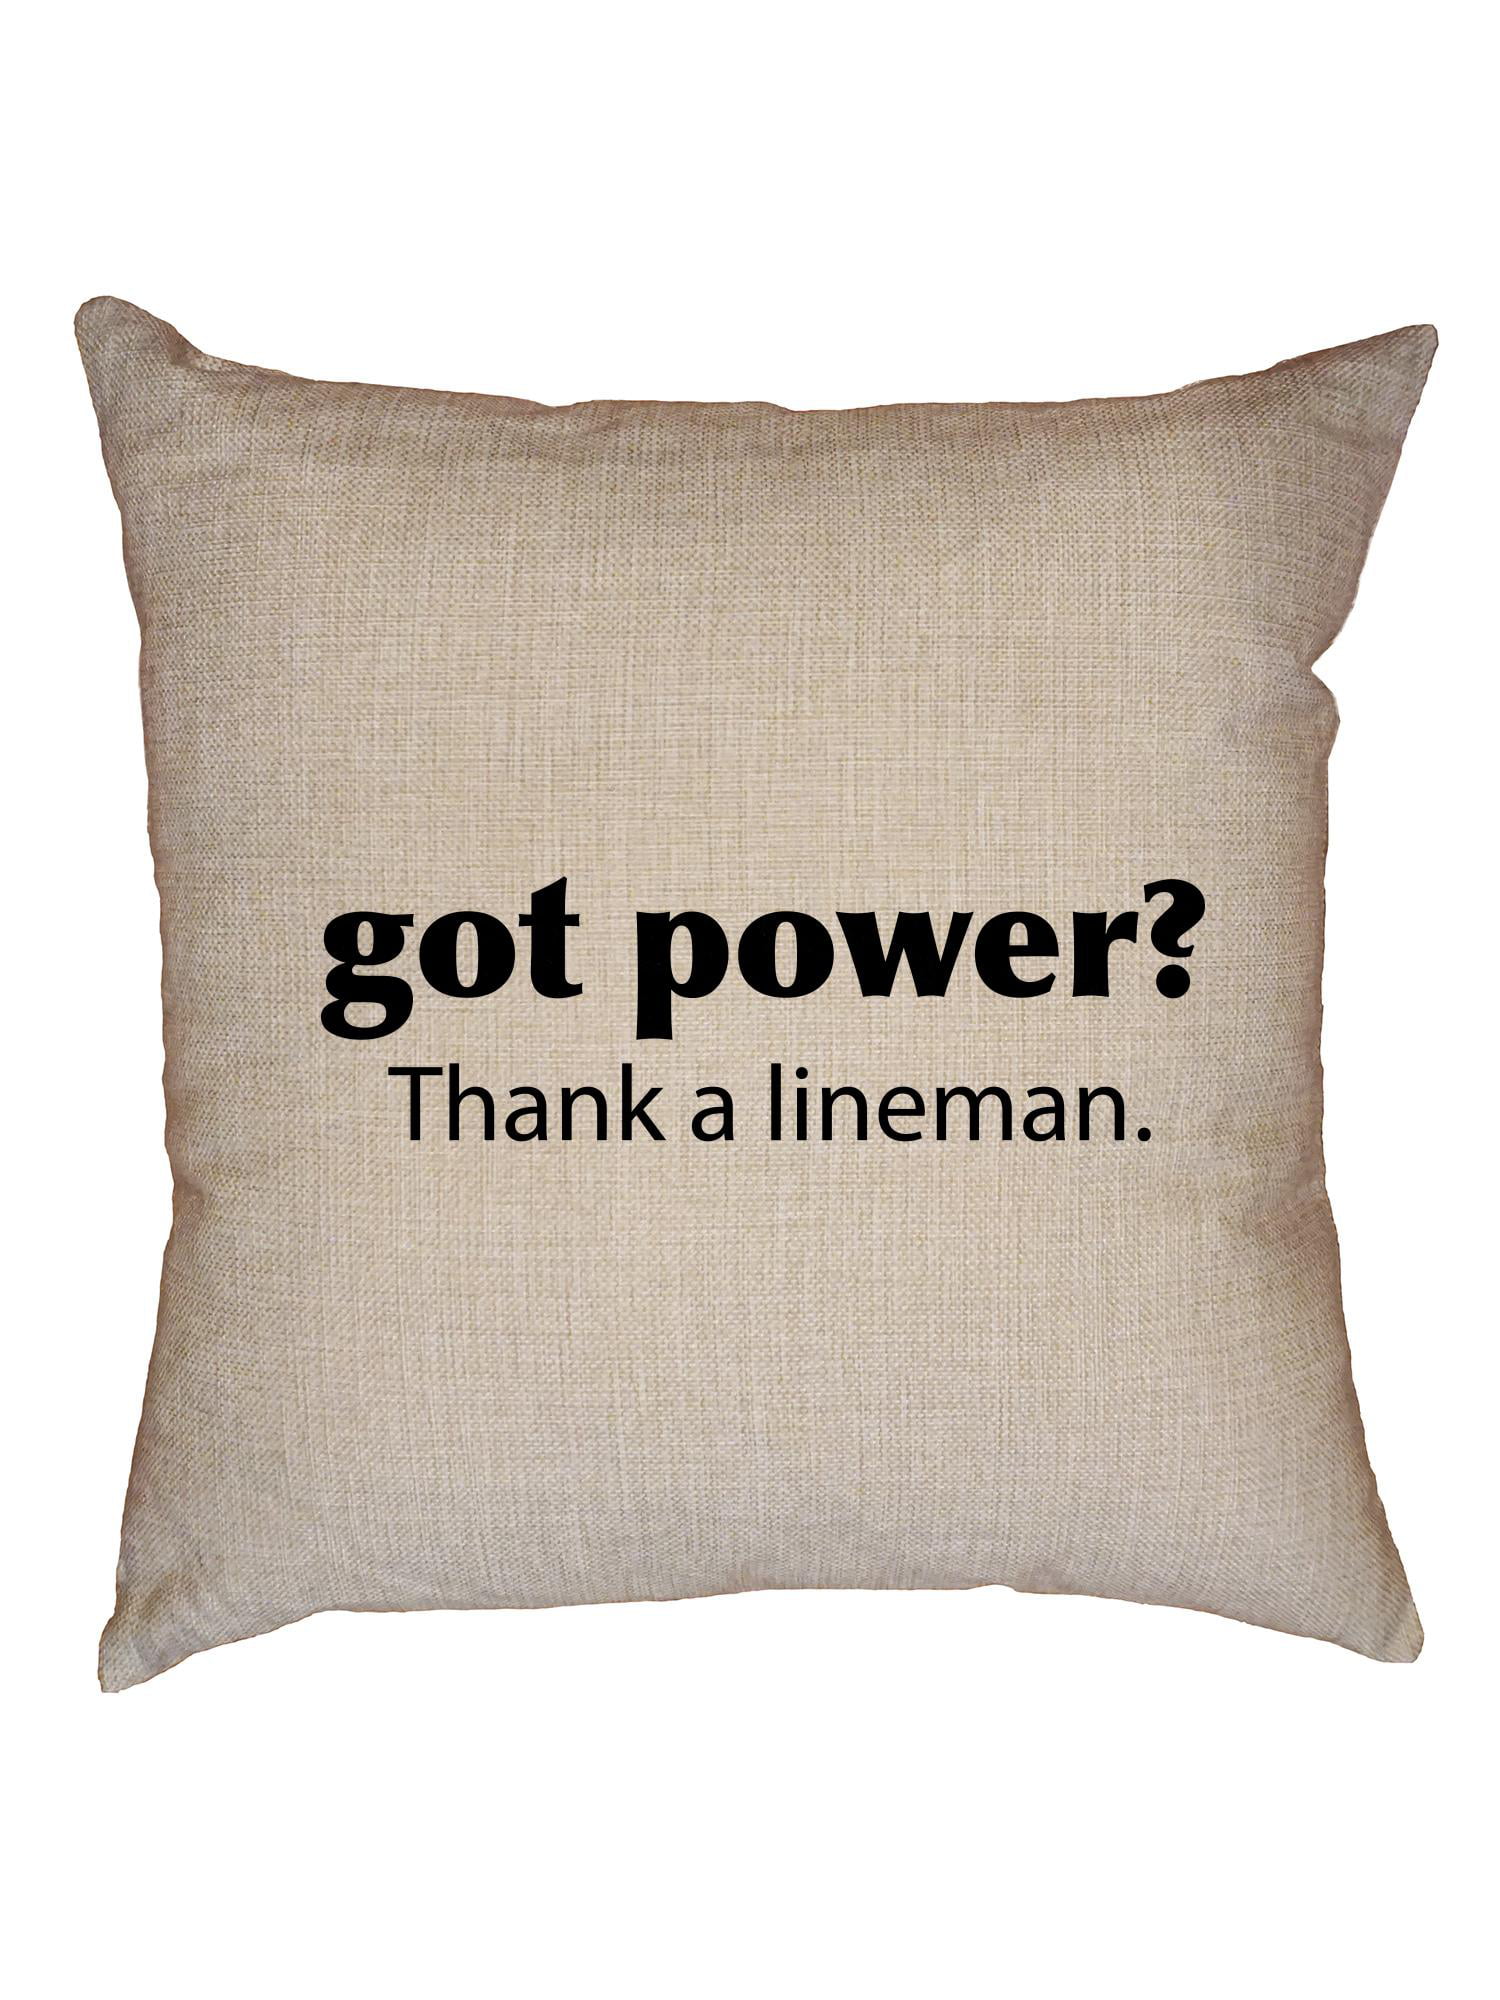 Multicolor Electrician Lineman Gifts Commercial Electricians Gift Throw Pillow 18x18